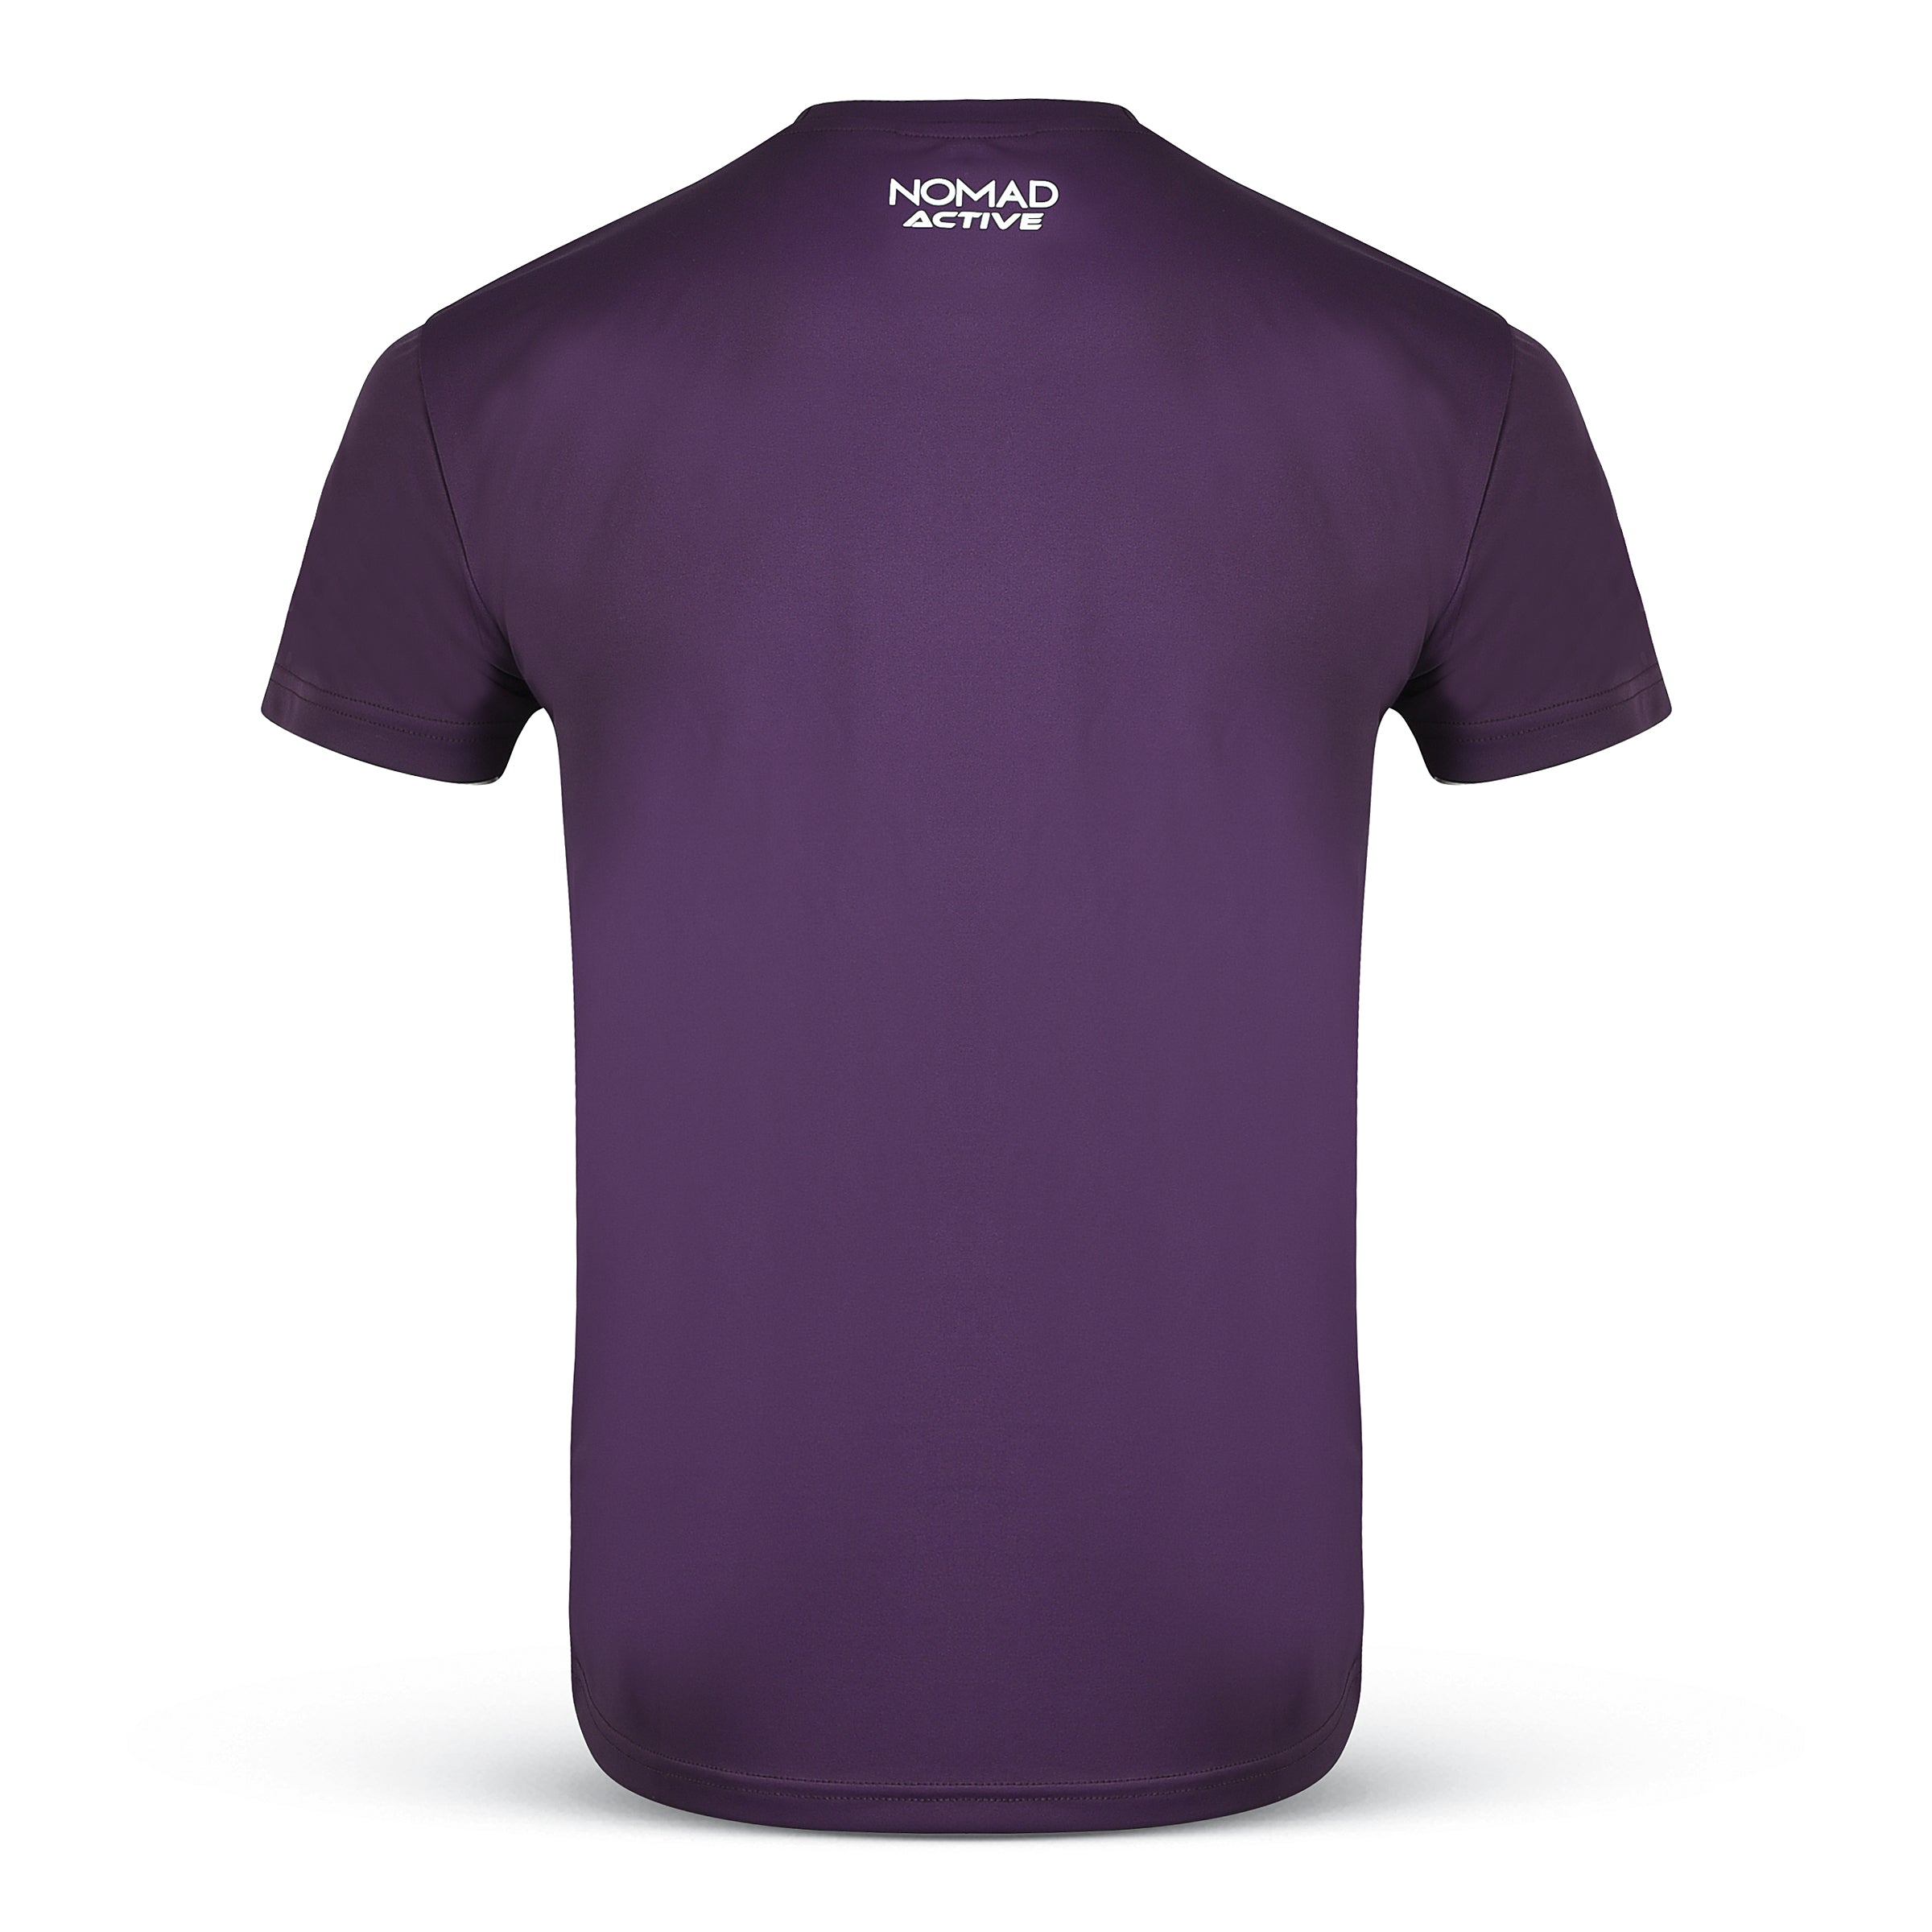 NOMAD ACTIVE T-SHIRT